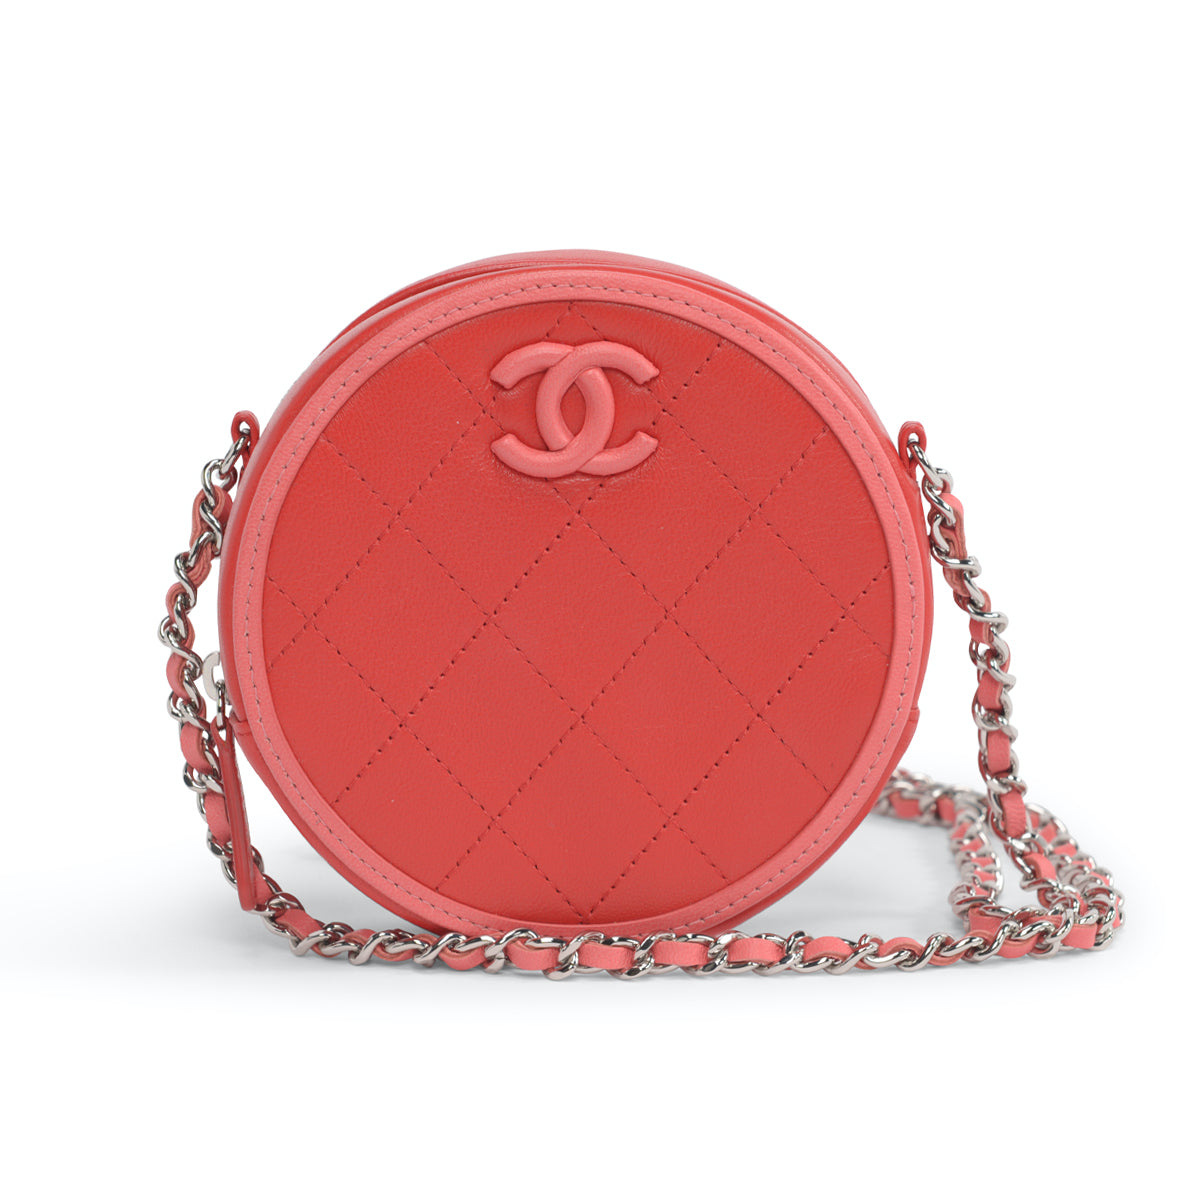 Chanel Classic Quilted WOC Crossbody Bag Beige in Leather with Goldtone   US